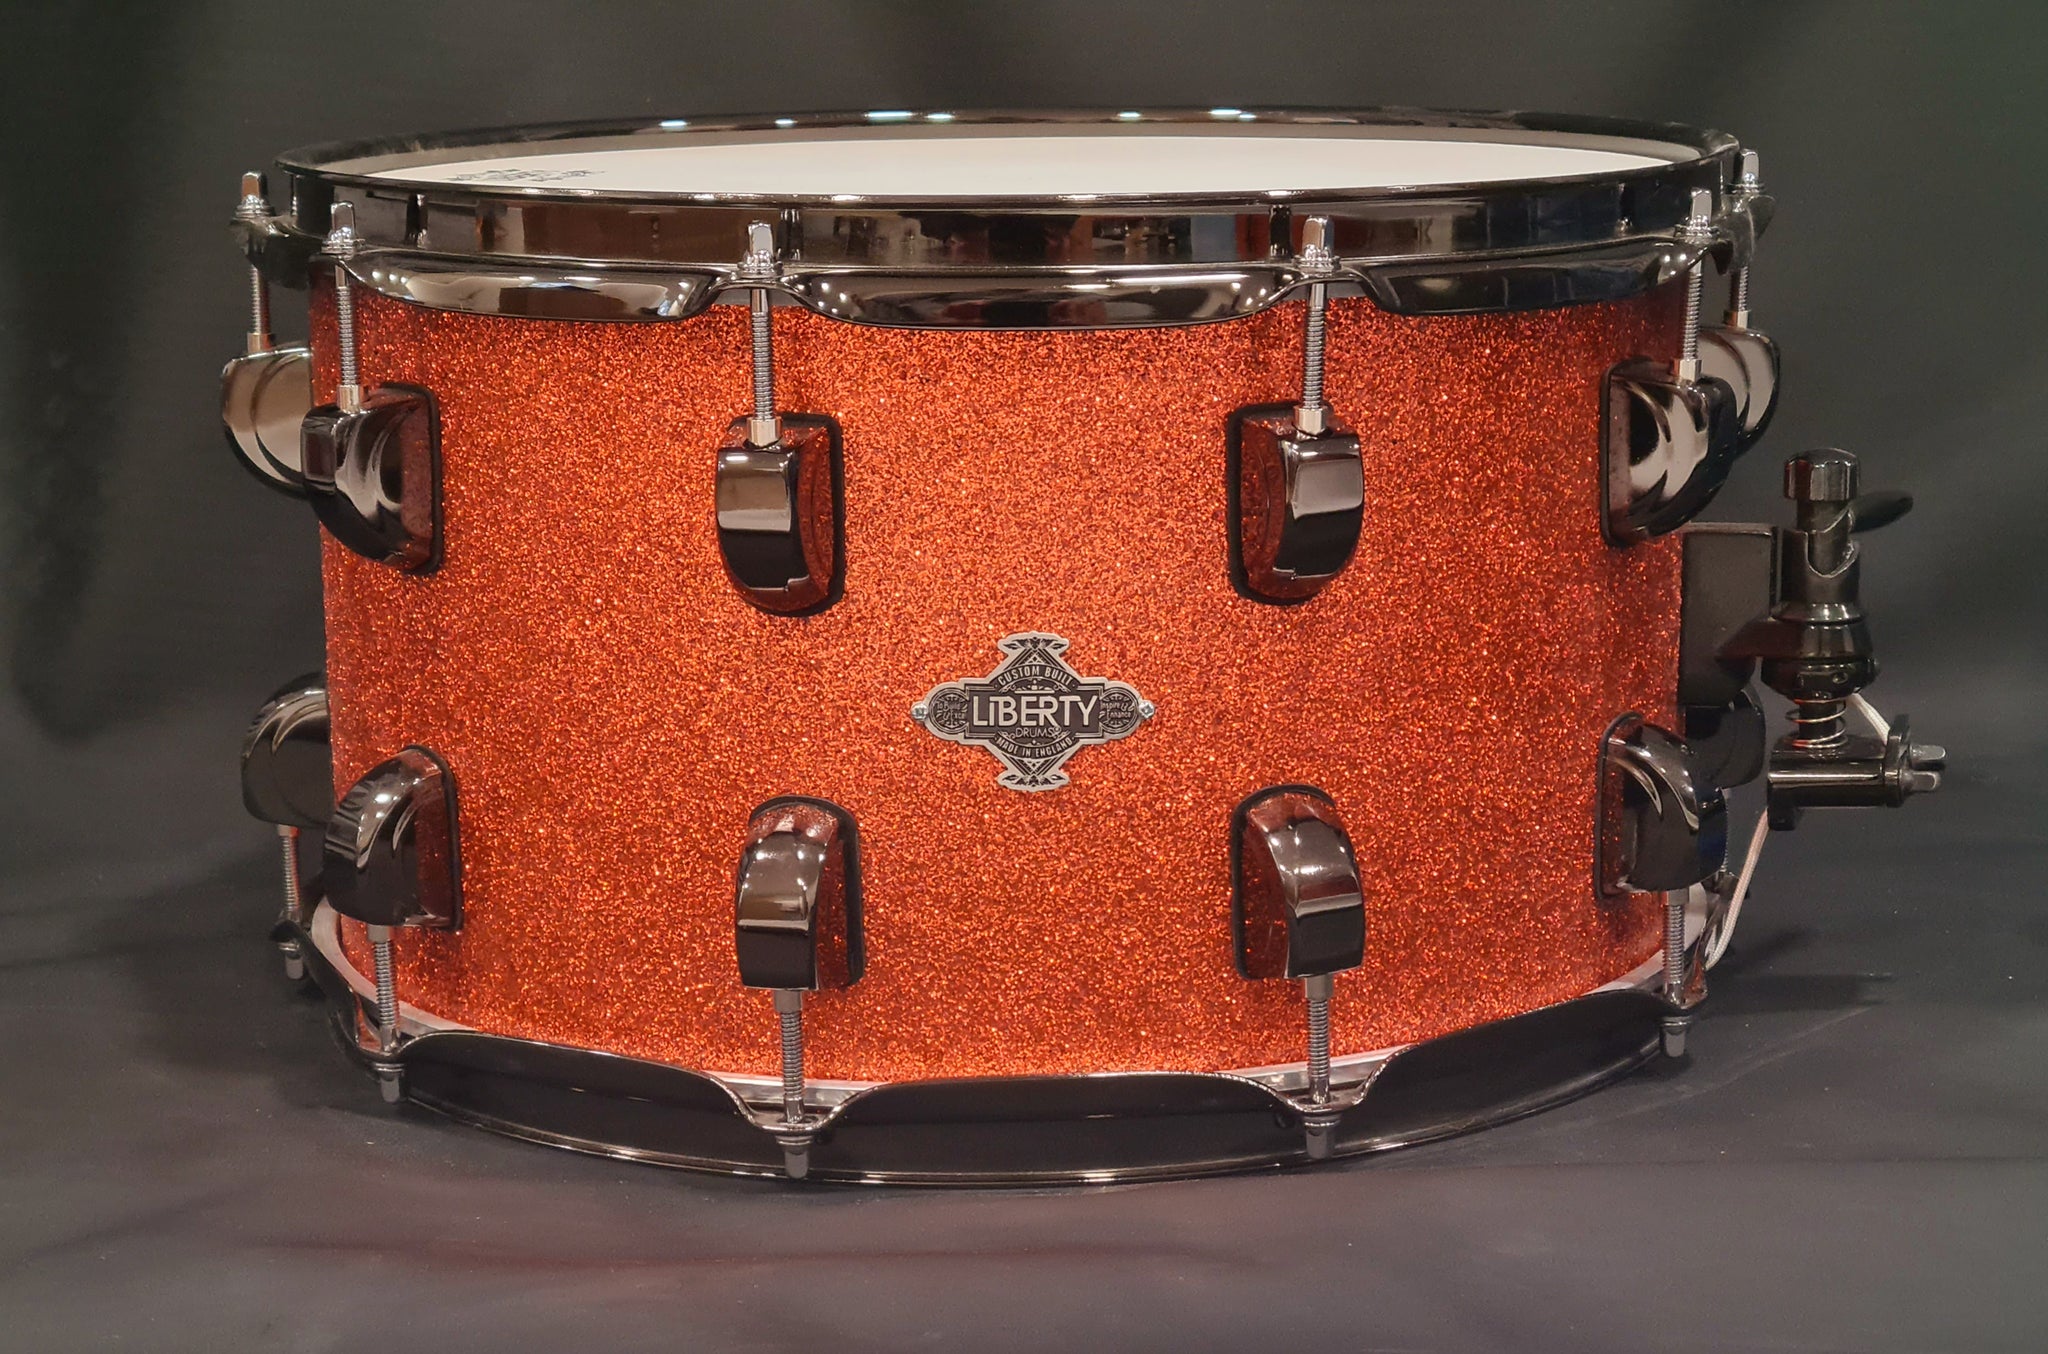 14x8" Liberty Drums Snare drum in a stunning orange sparkle metal flake lacquer